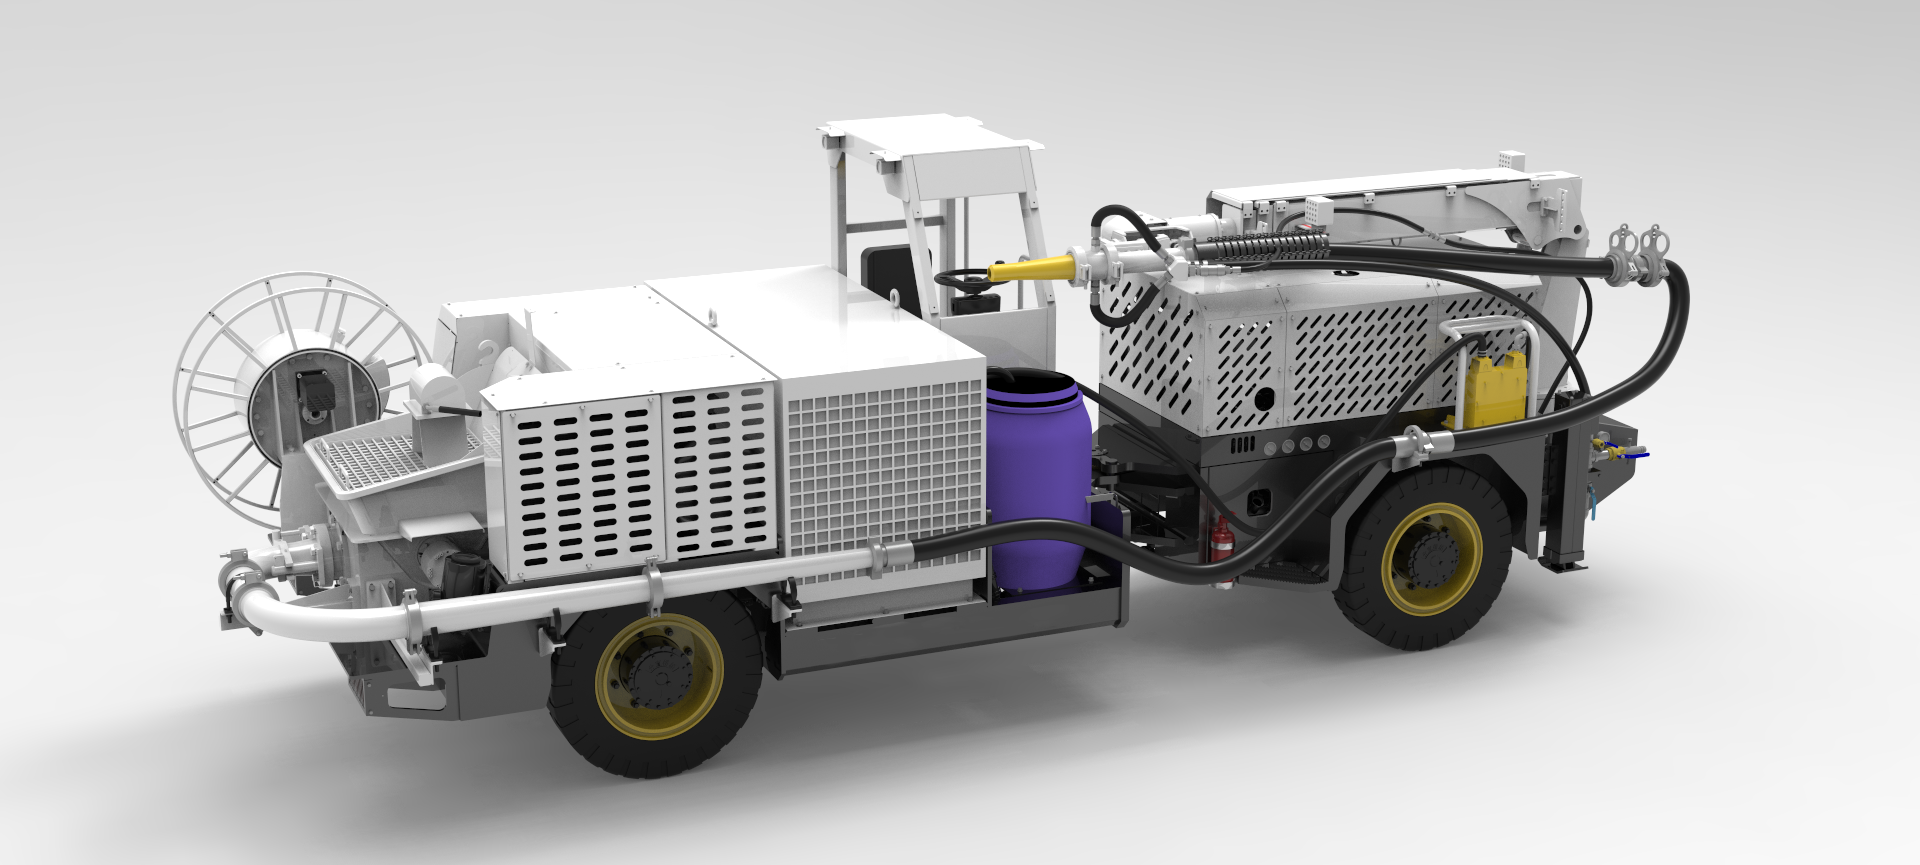 wet-mix-concrete-sprayer-GH1809G-K2-by-HOT-Mining-1 (3).png